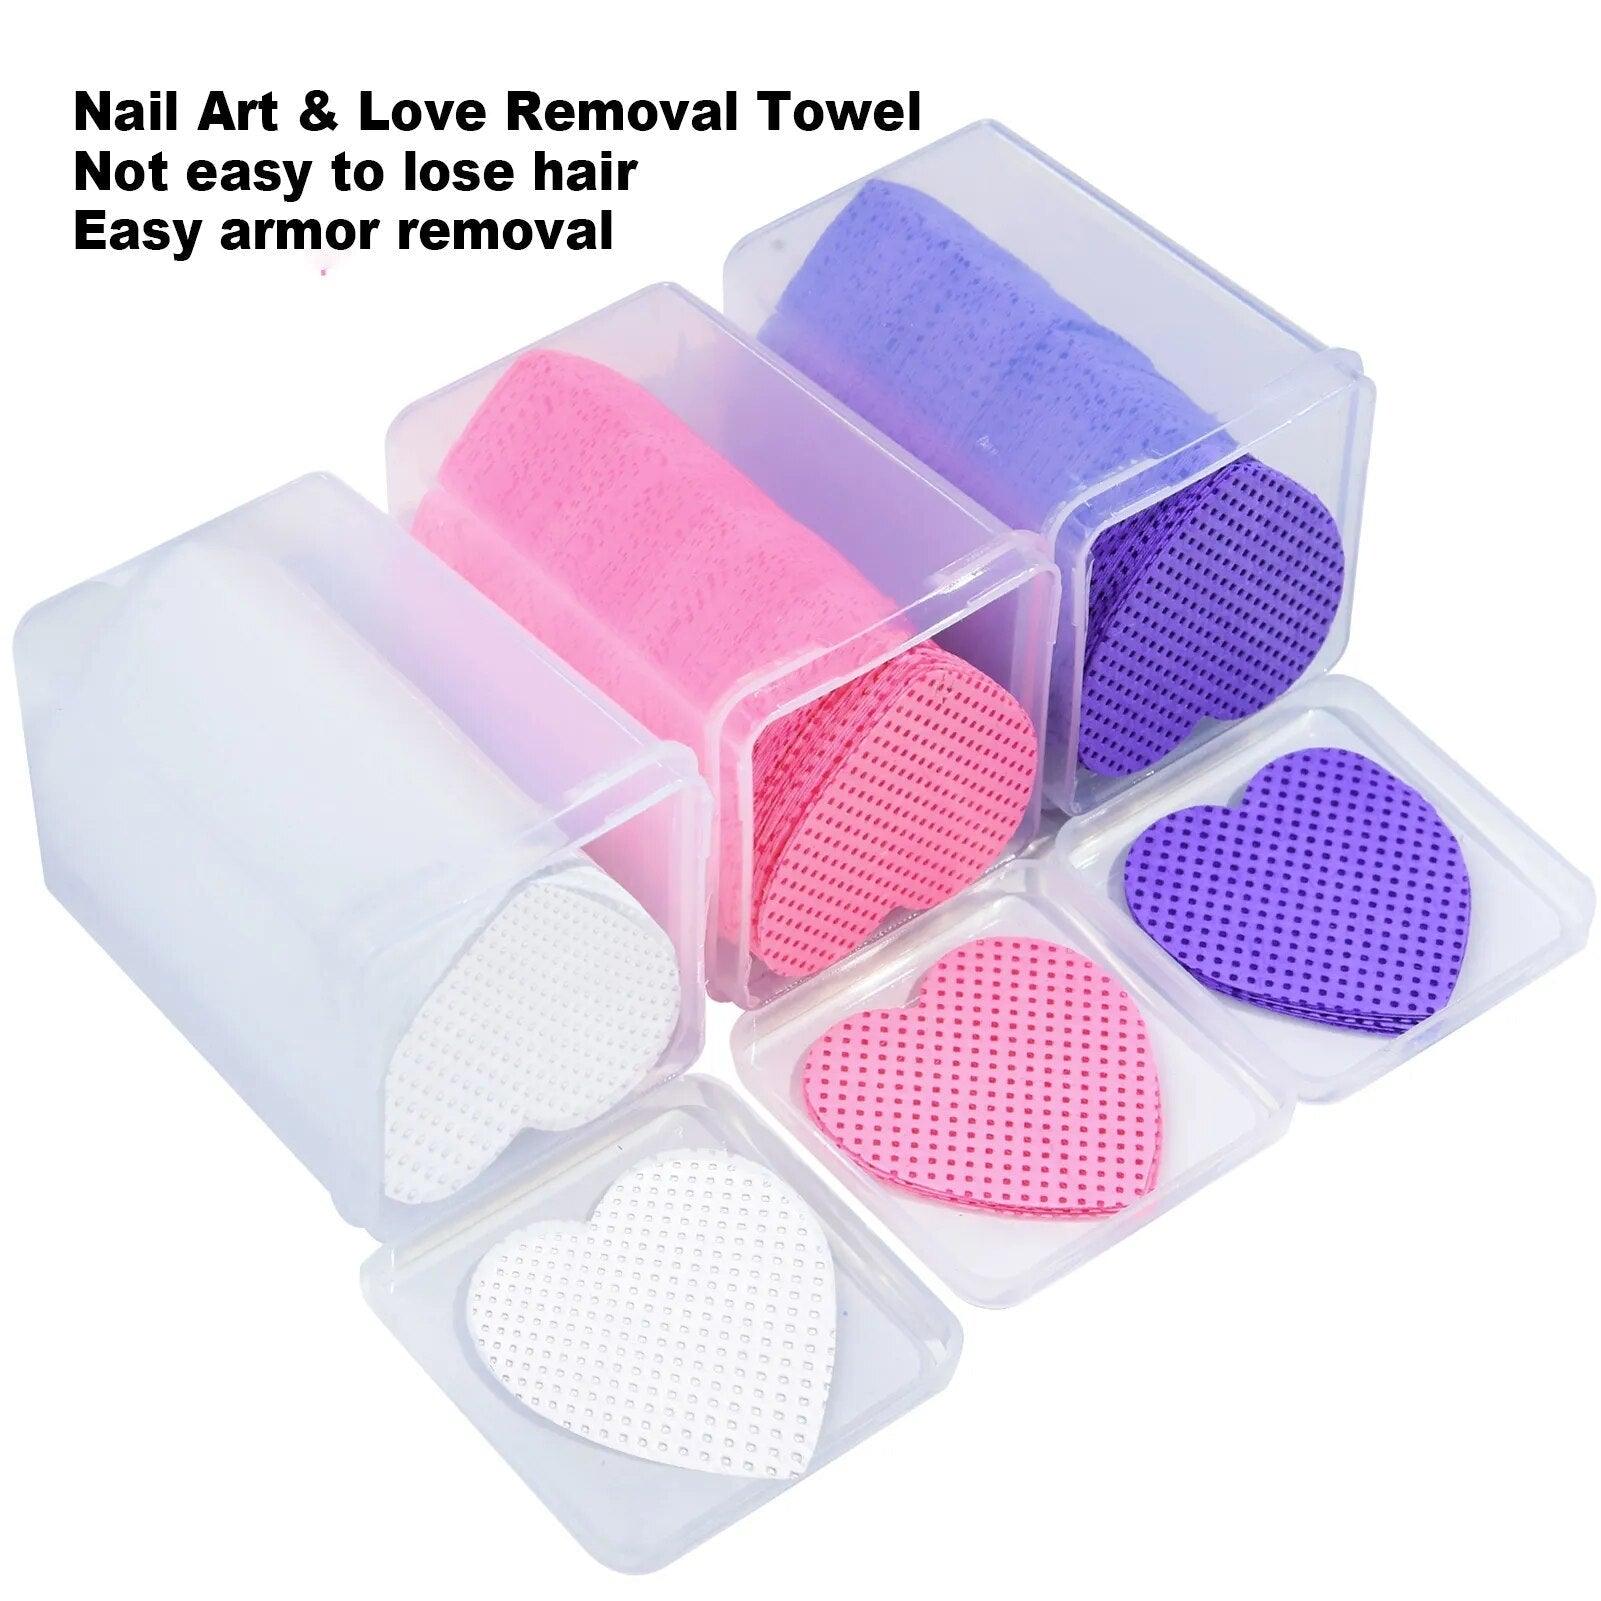 200pcs/Box Lint Free Nail Wipes Napkins Nail Art Gel Polish Remover Pink Heart Shape Paper Cotton Pads Manicure Cleaning Tools - Noovaluxe